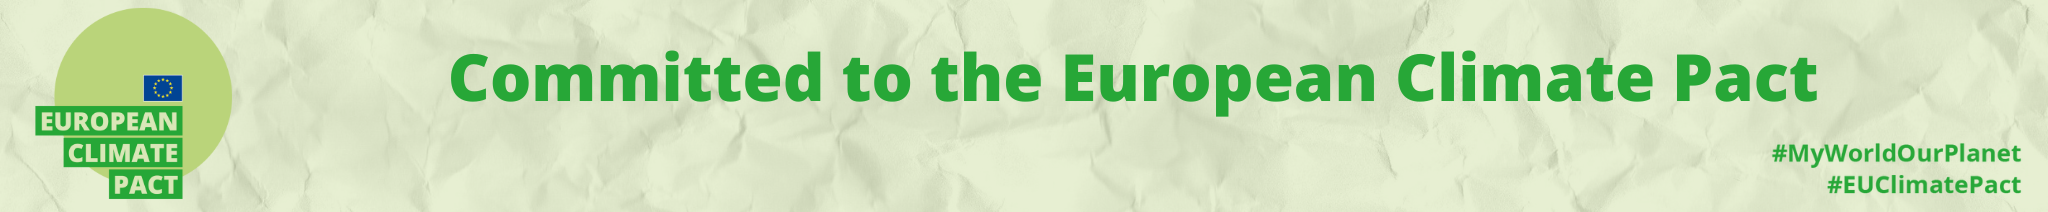 Committed to the European Climate Pact